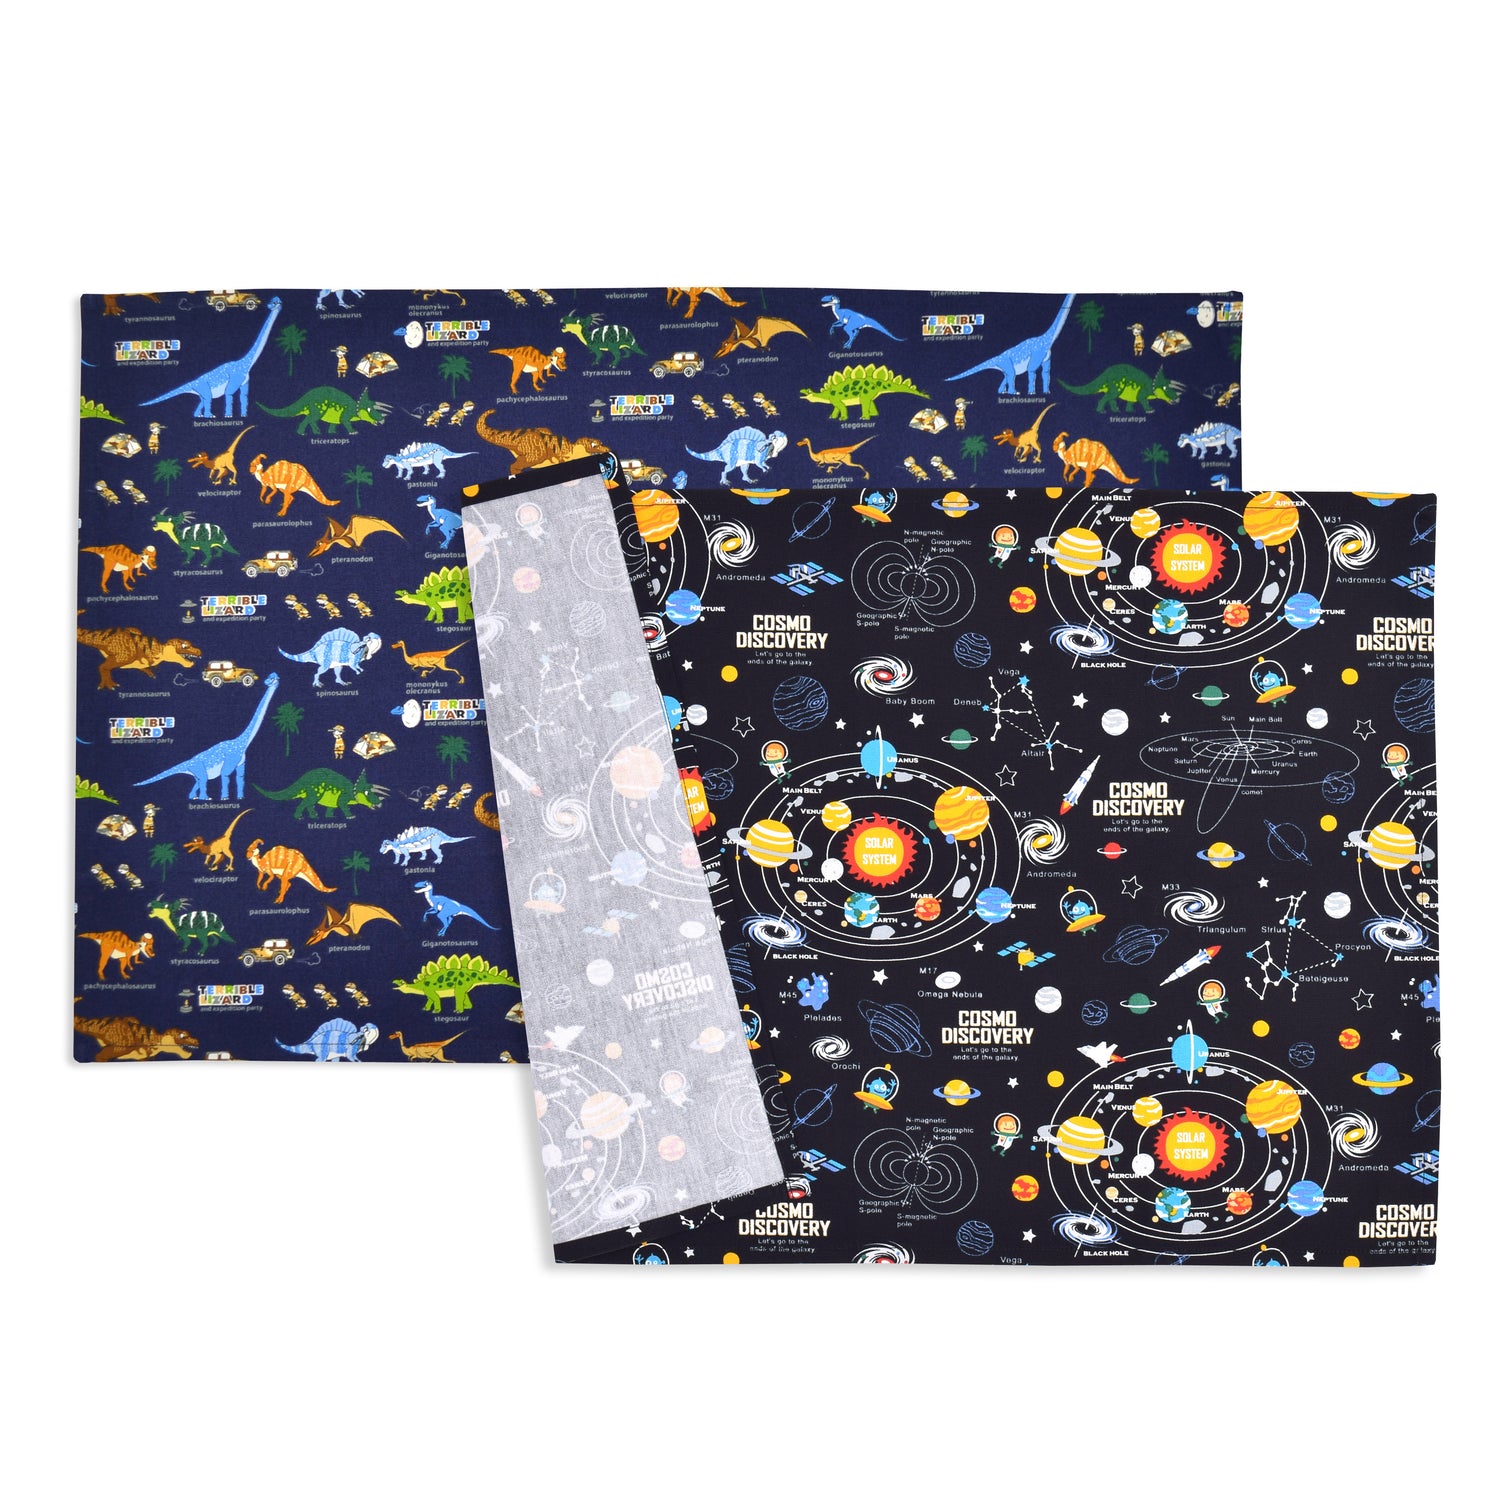 [SALE: 50% OFF] Placemat (40cm x 60cm) Set of 2 different patterns Solar System Planets and Dinosaur Continent Set 